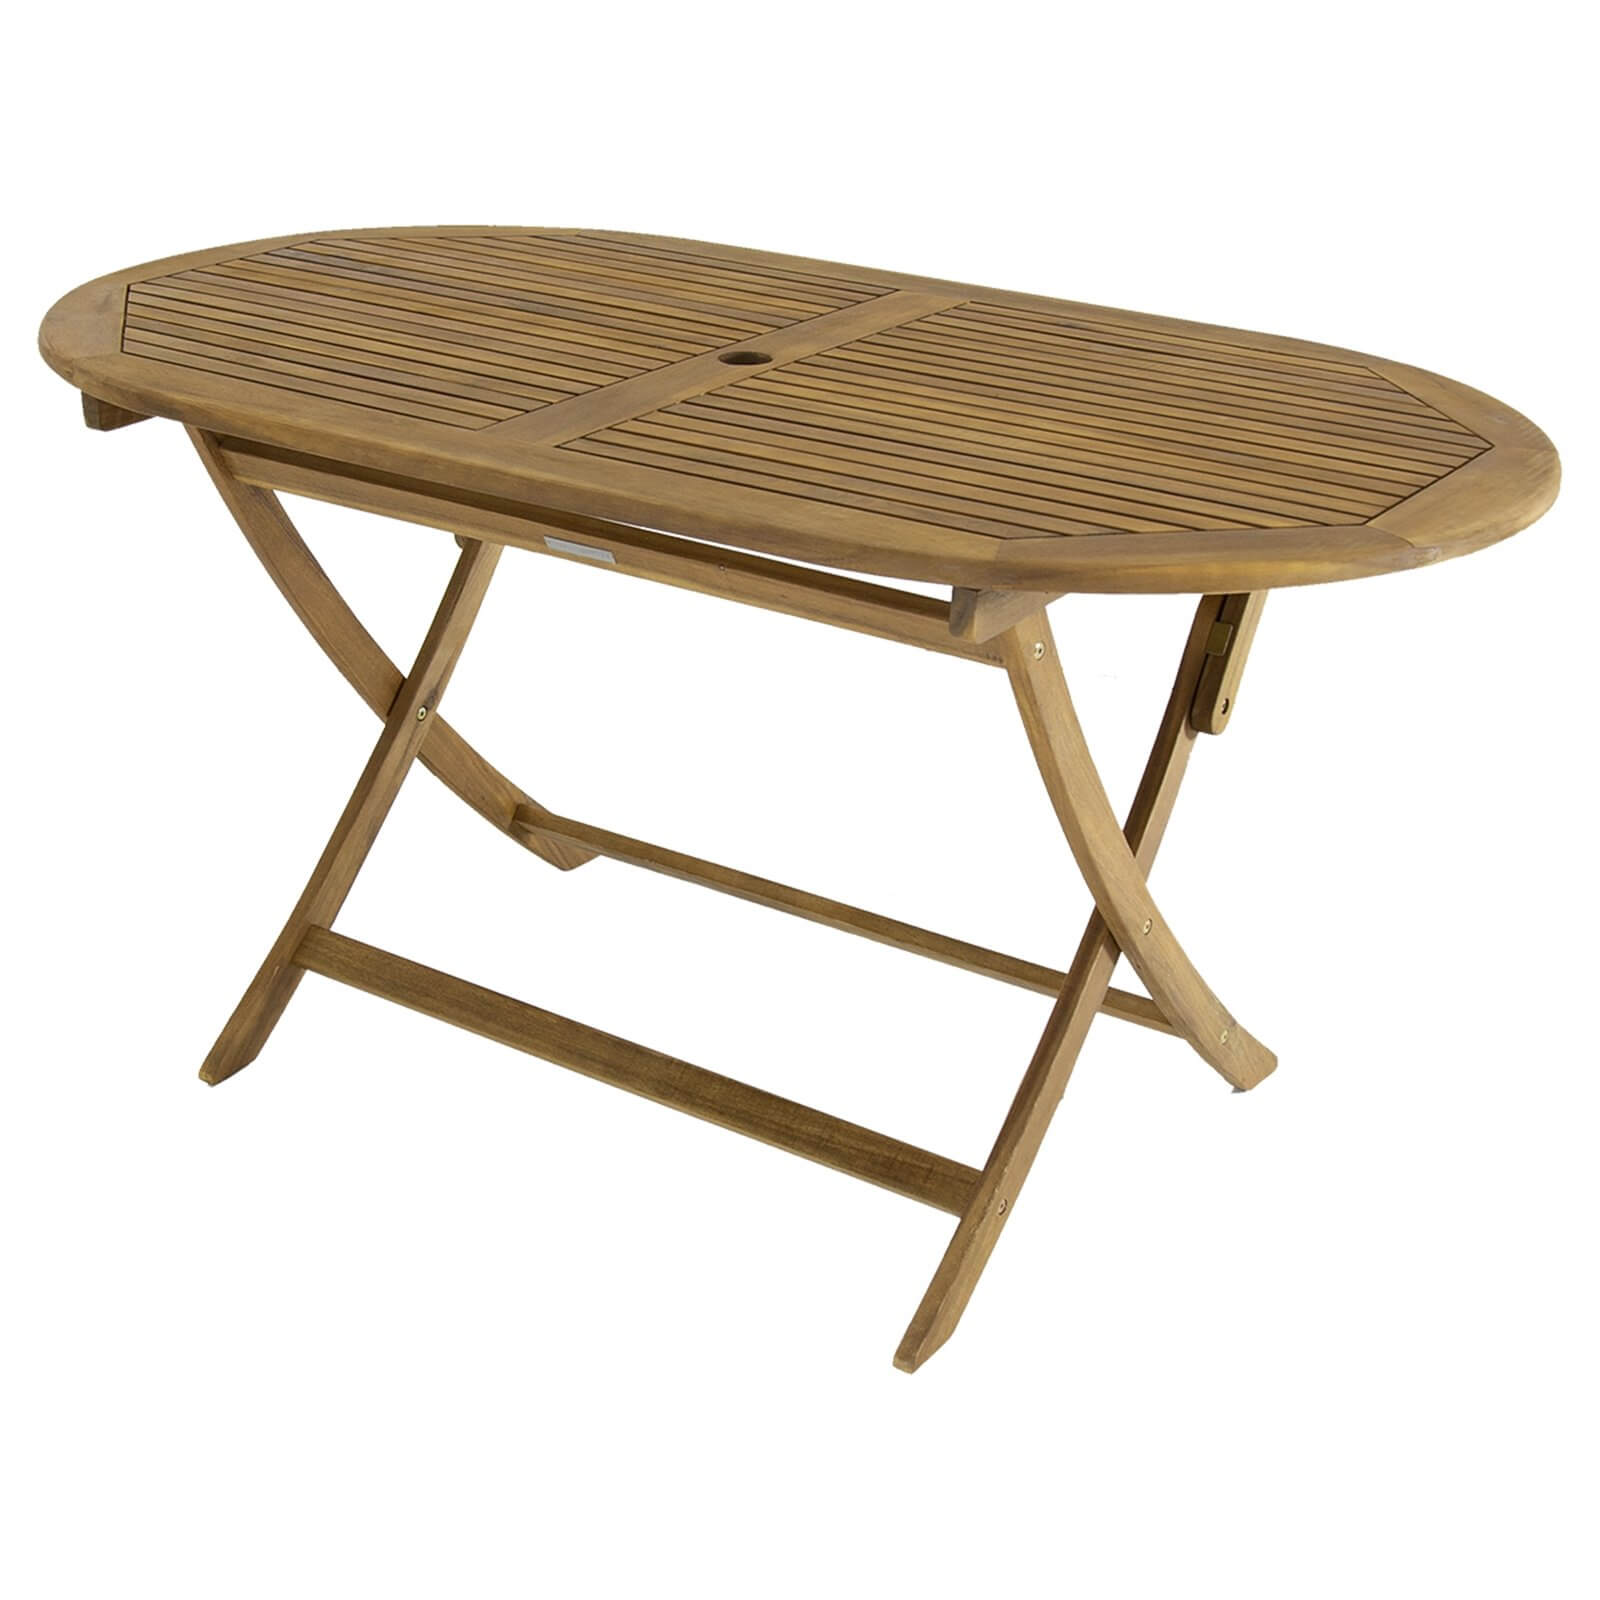 Charles Bentley Wooden FSC Acacia Furniture Oval Table